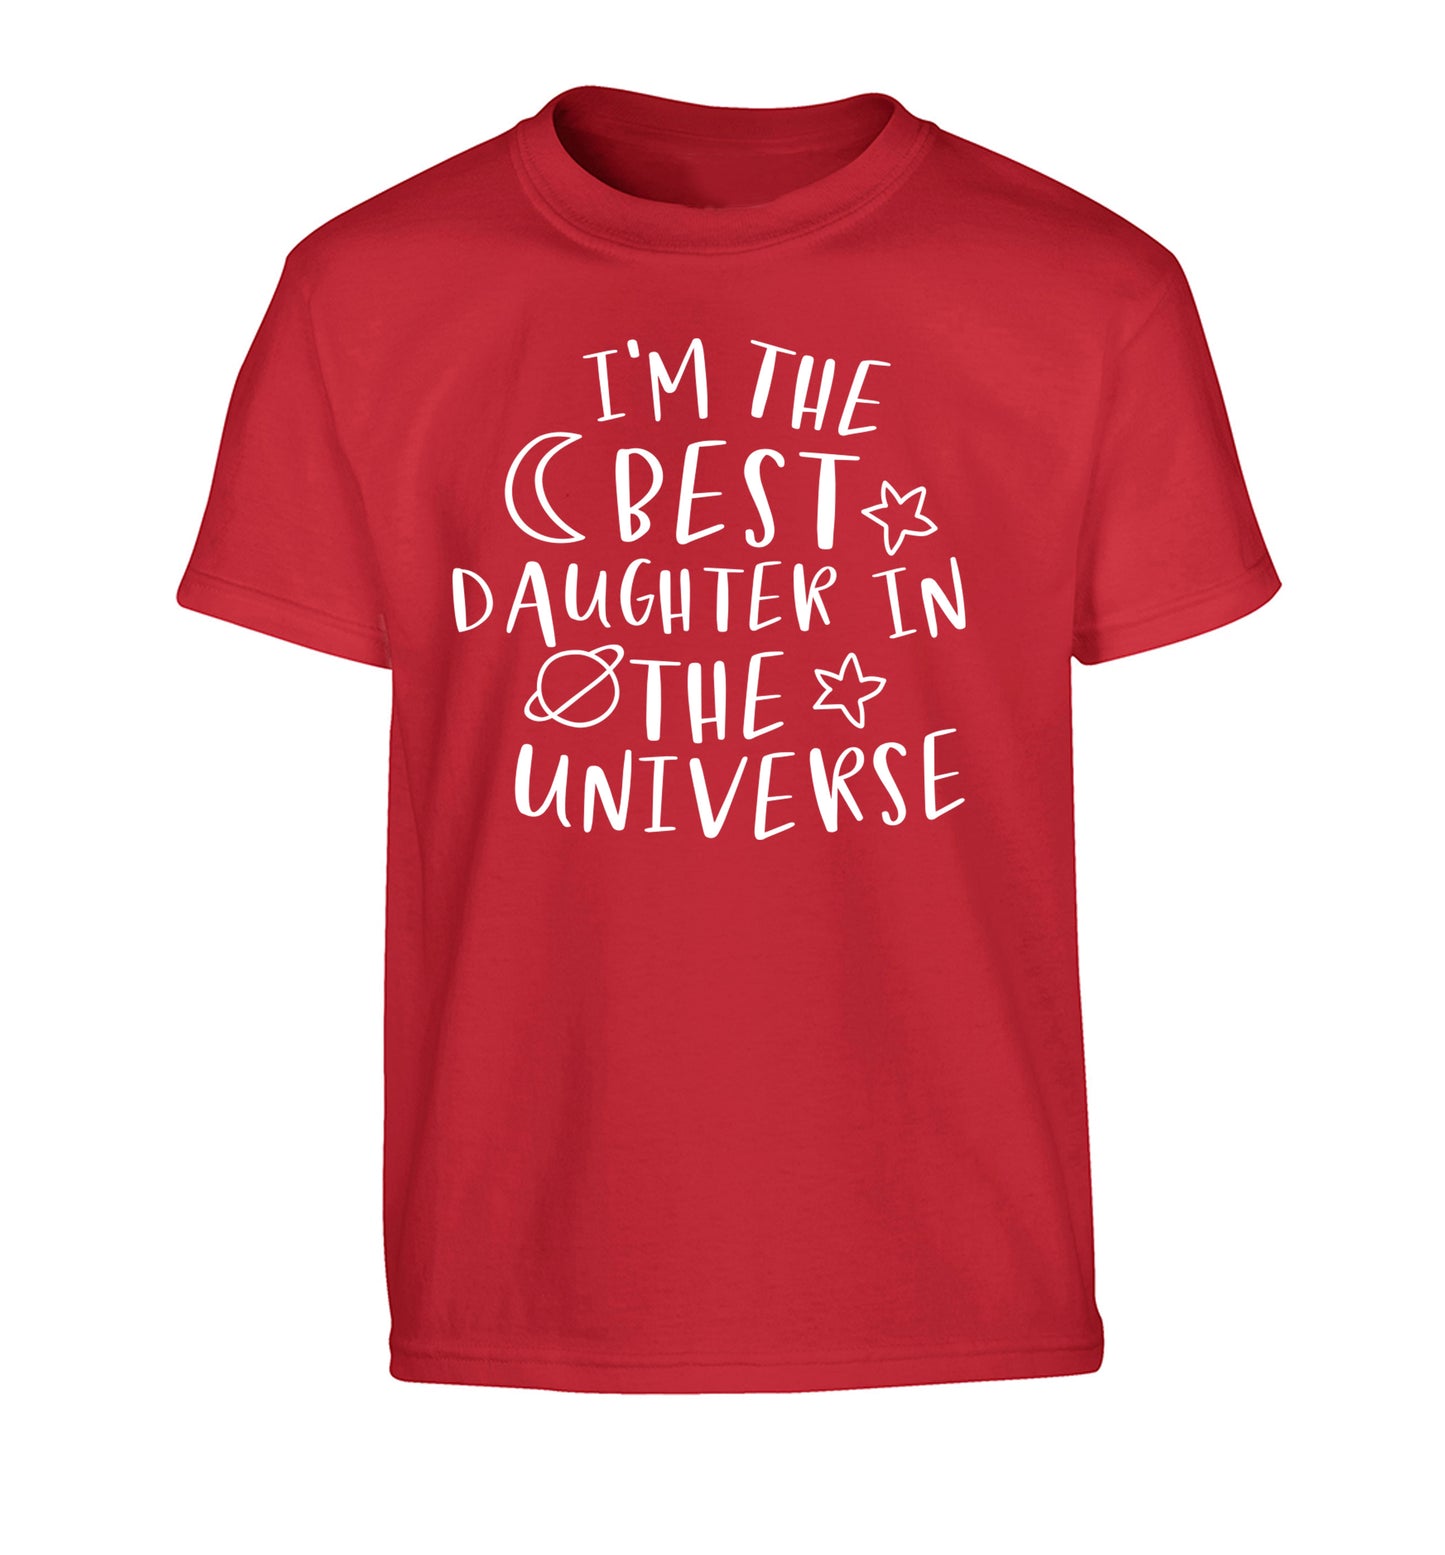 I'm the best daughter in the universe Children's red Tshirt 12-13 Years